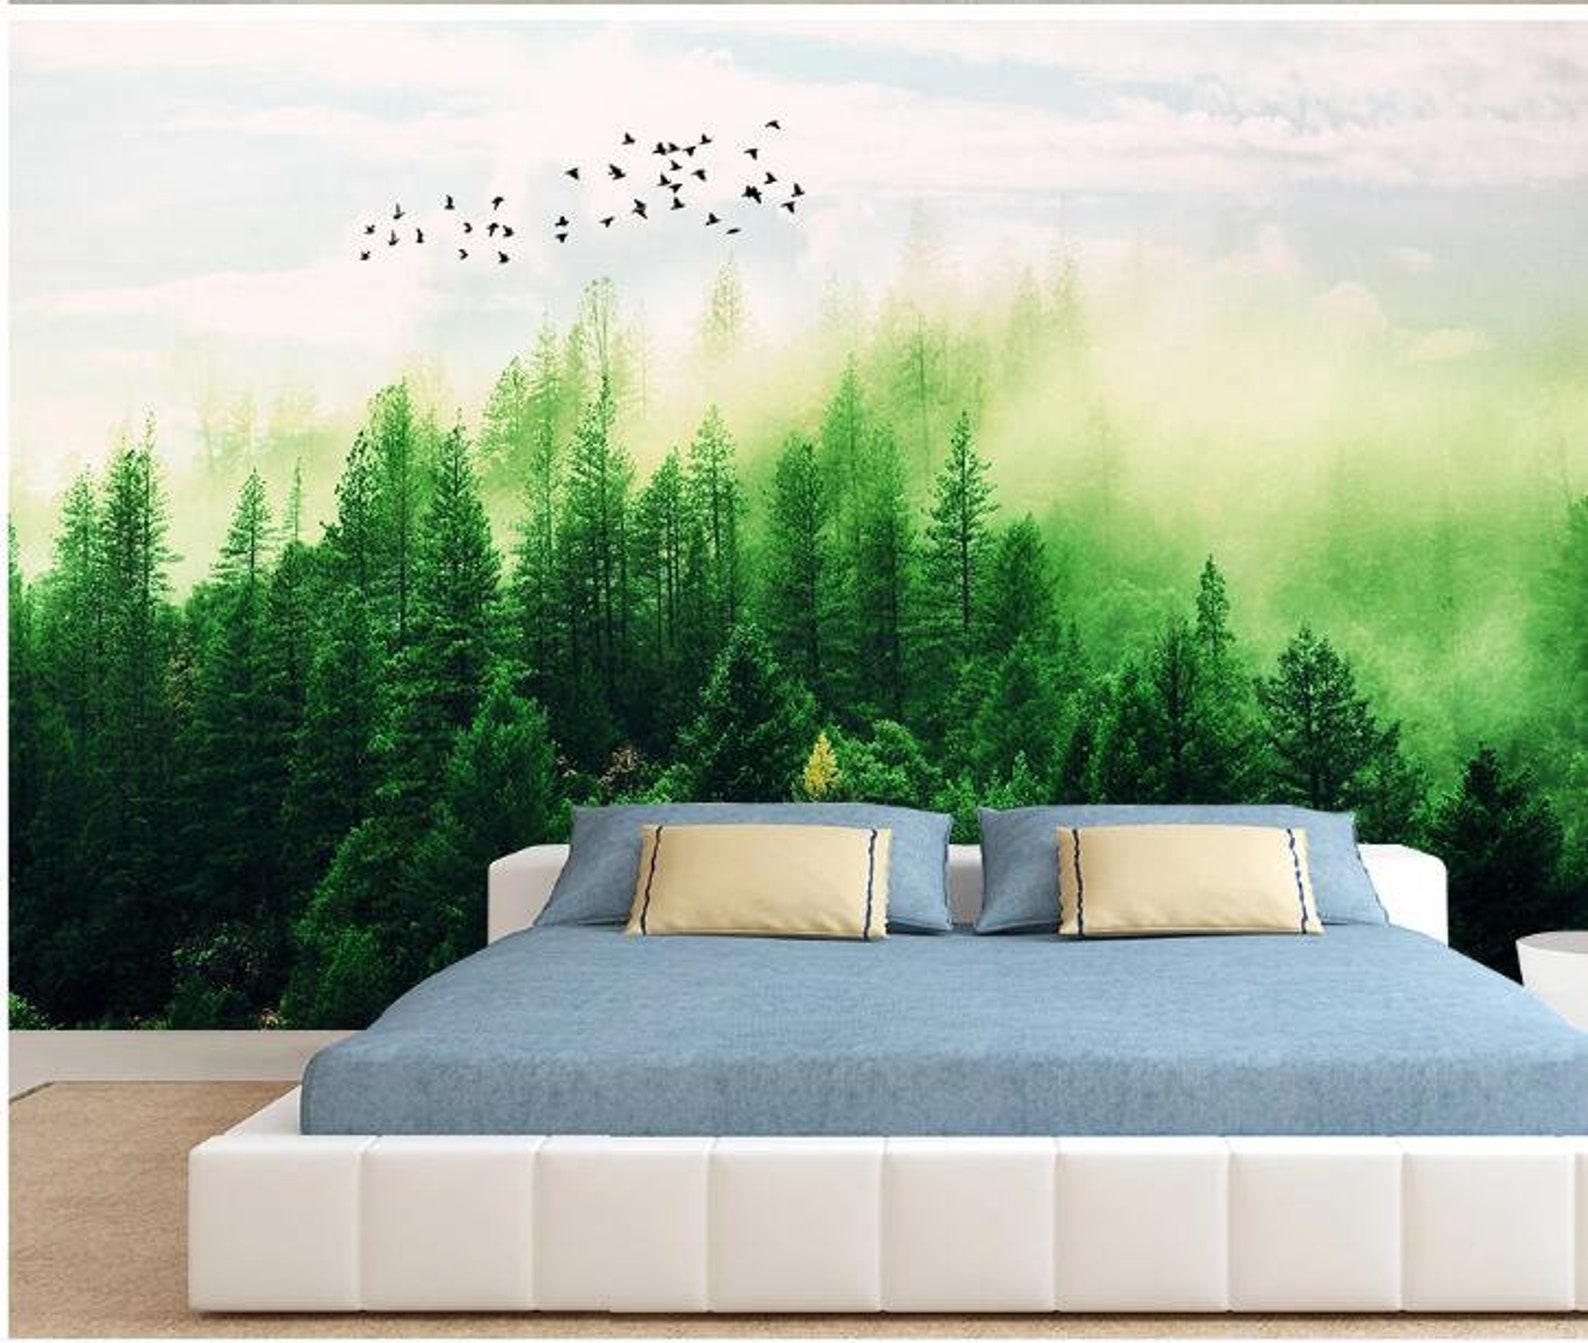 Abstract Scenic Misty Forest Wallpaper Wall Mural Nature | Etsy